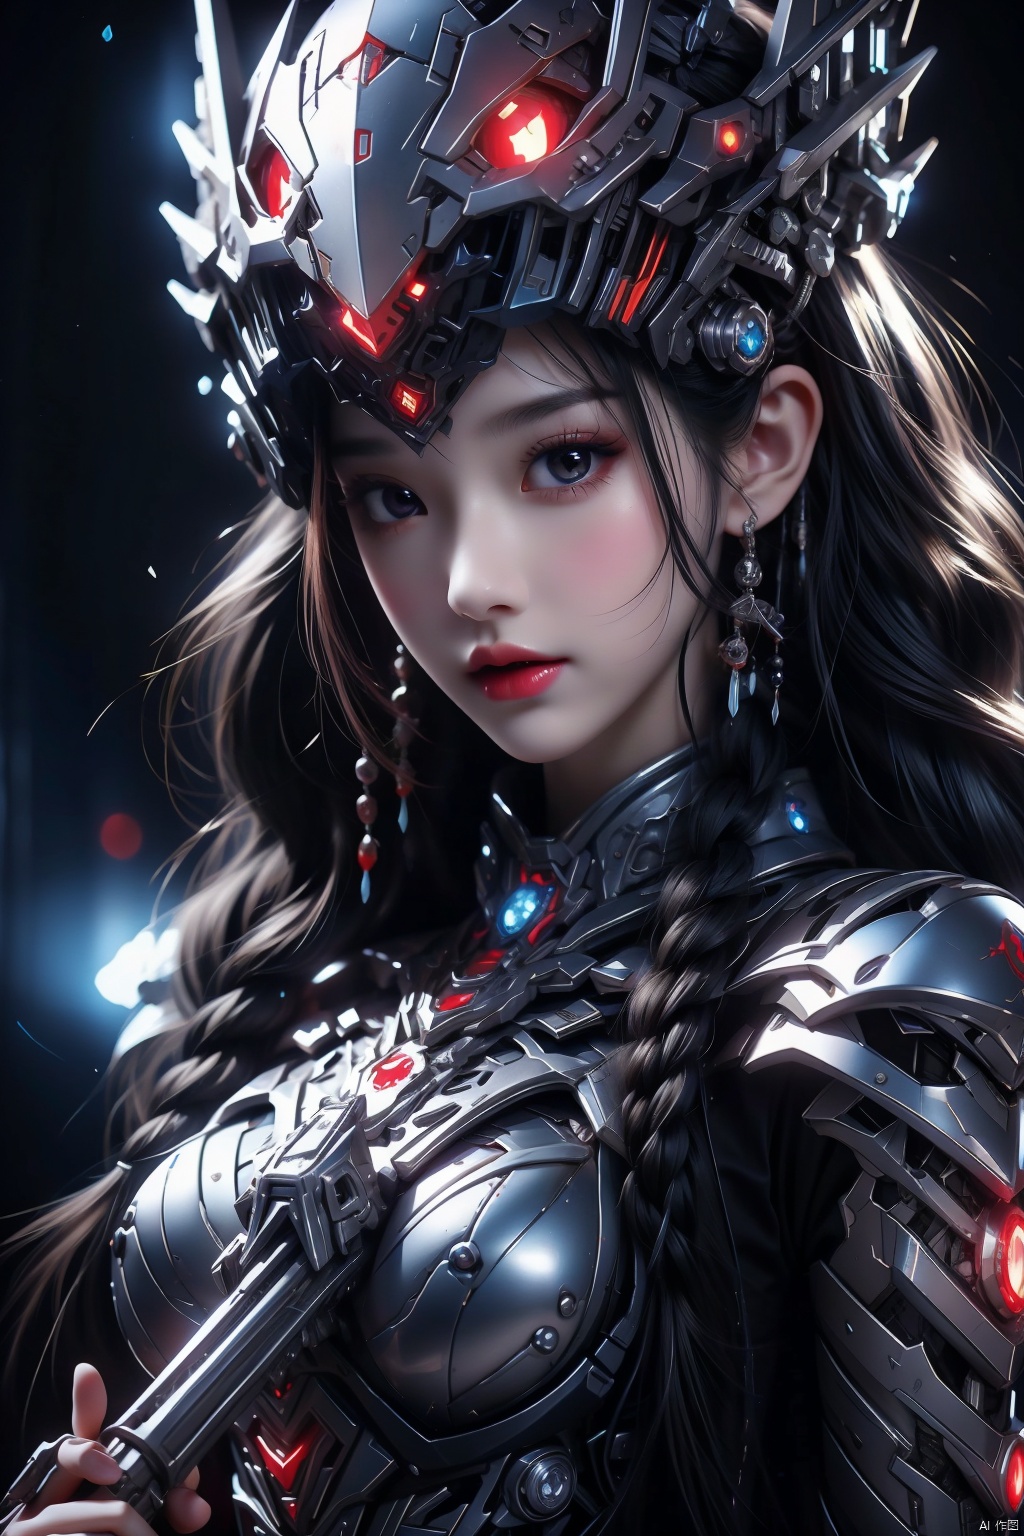 ((diamondly beautiful eyed girl)) with braids holds a weapon in his hand on a black background,  red glowing eyes,  holy cyborg necromancer girl,  holds a weapon in his hand,  Sci-Fi Helmet,  cyber mask,  brian sum,  goddess of war,  blue cyborg,  balaskas,  blink,  highest quality,  masterpiece,  ultra-detailed,  dof,  artistic lighting,  highest quality,  masterpiece,  ultra-detailed,  dof,  rimlight,
